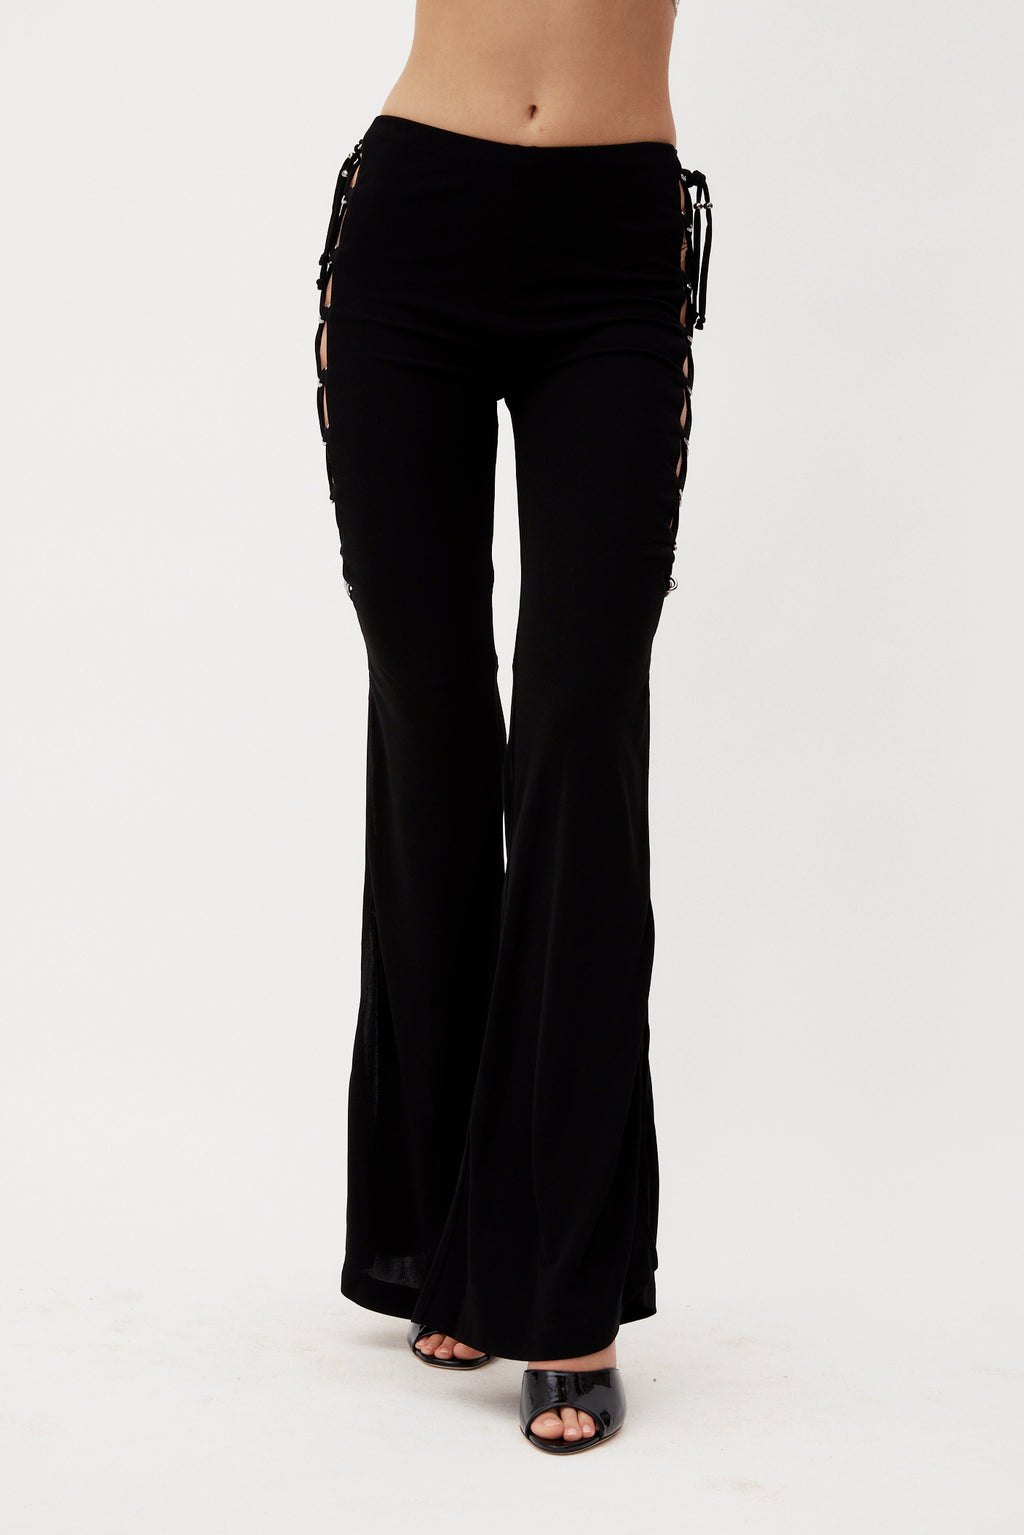 Cyrus Black Flare Trousers